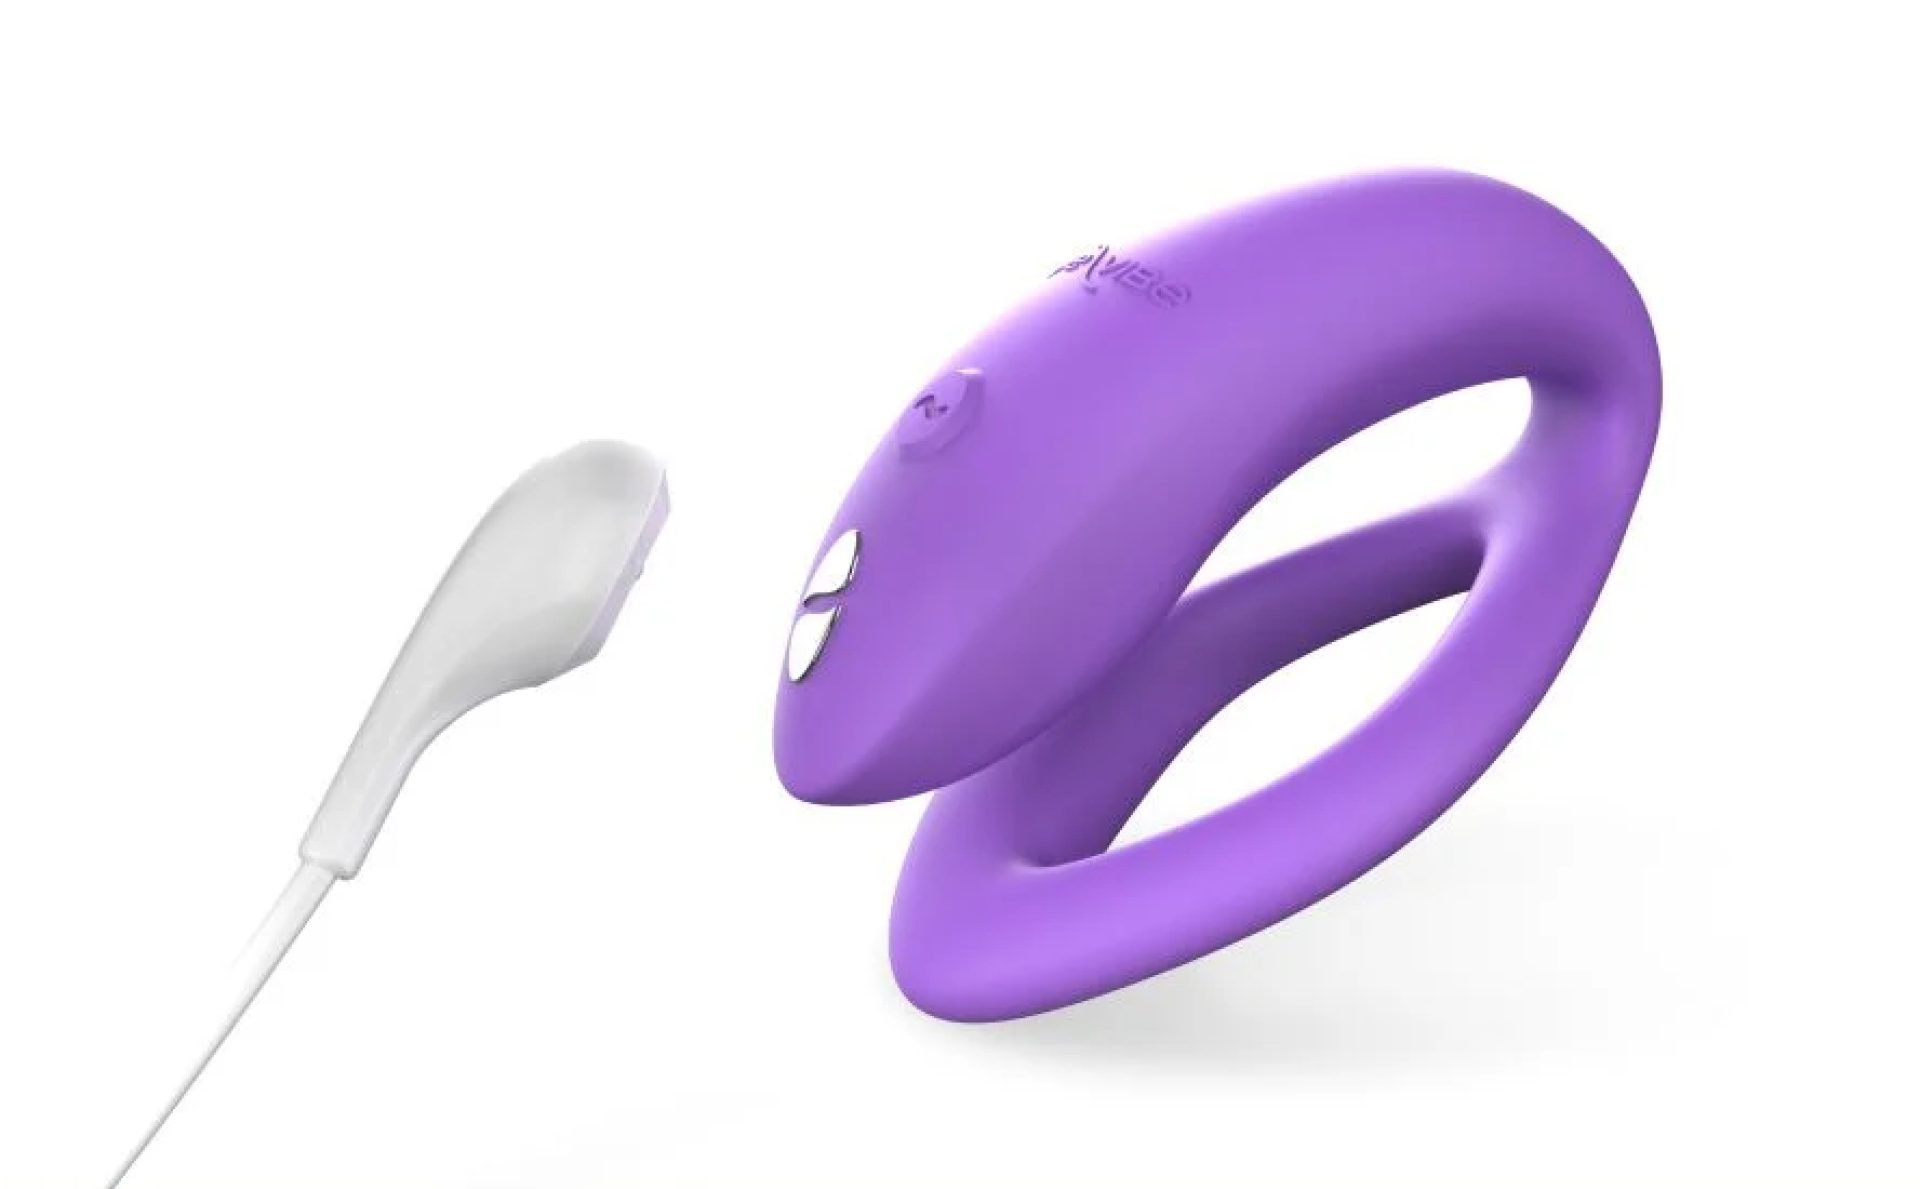 We-Vibe launches the Sync O: its first couples device with an ‘O’ section, featuring a purple vibrating toy and white earphone.